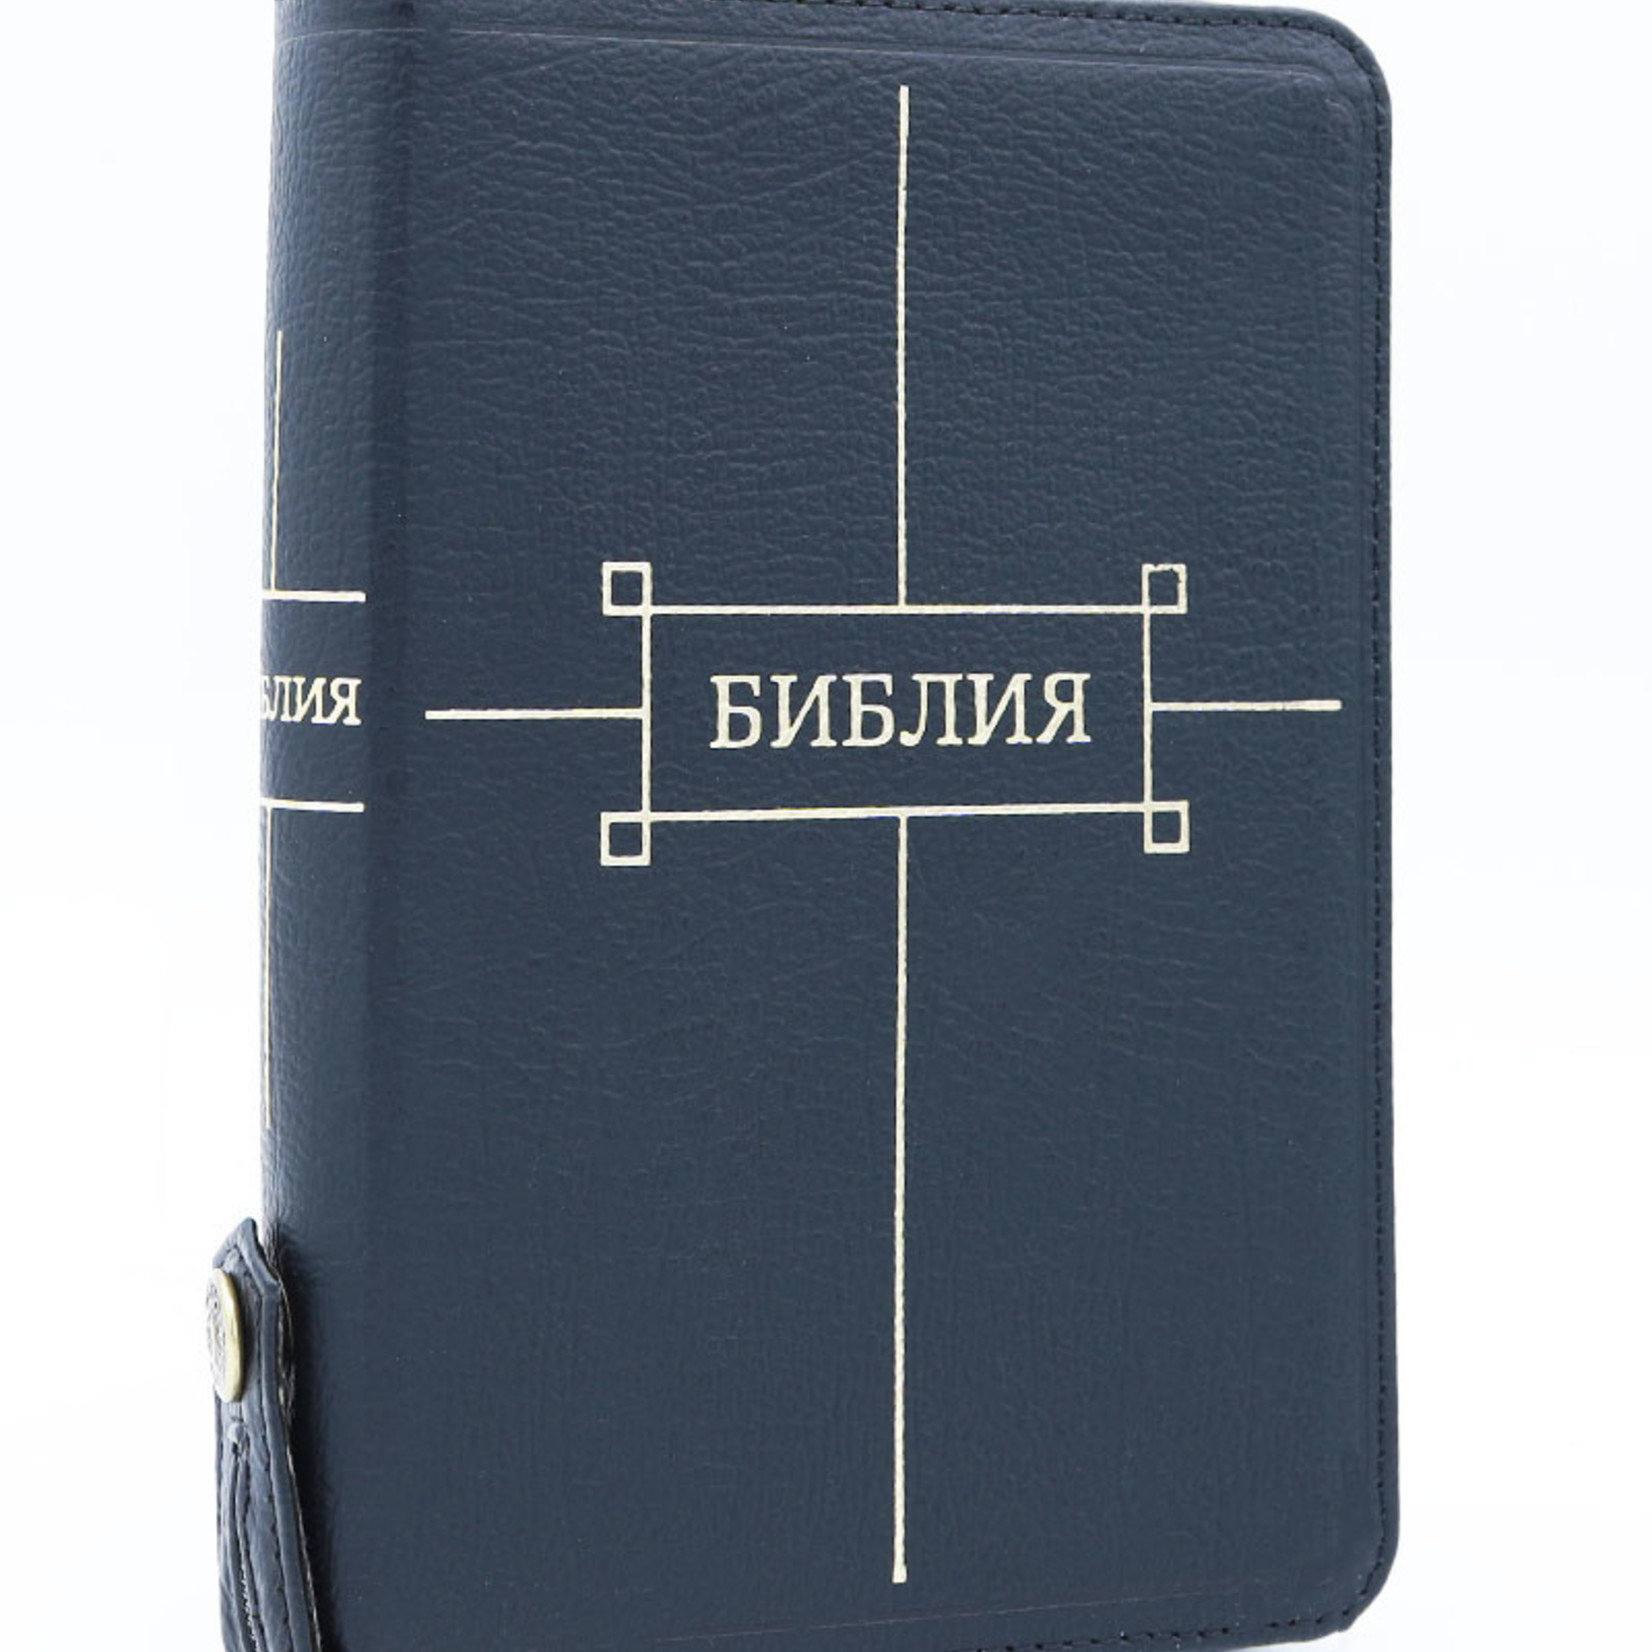 Библия, Каноническая (SYNO), Index, Leather with Zipper, Small Black with Fixing Button